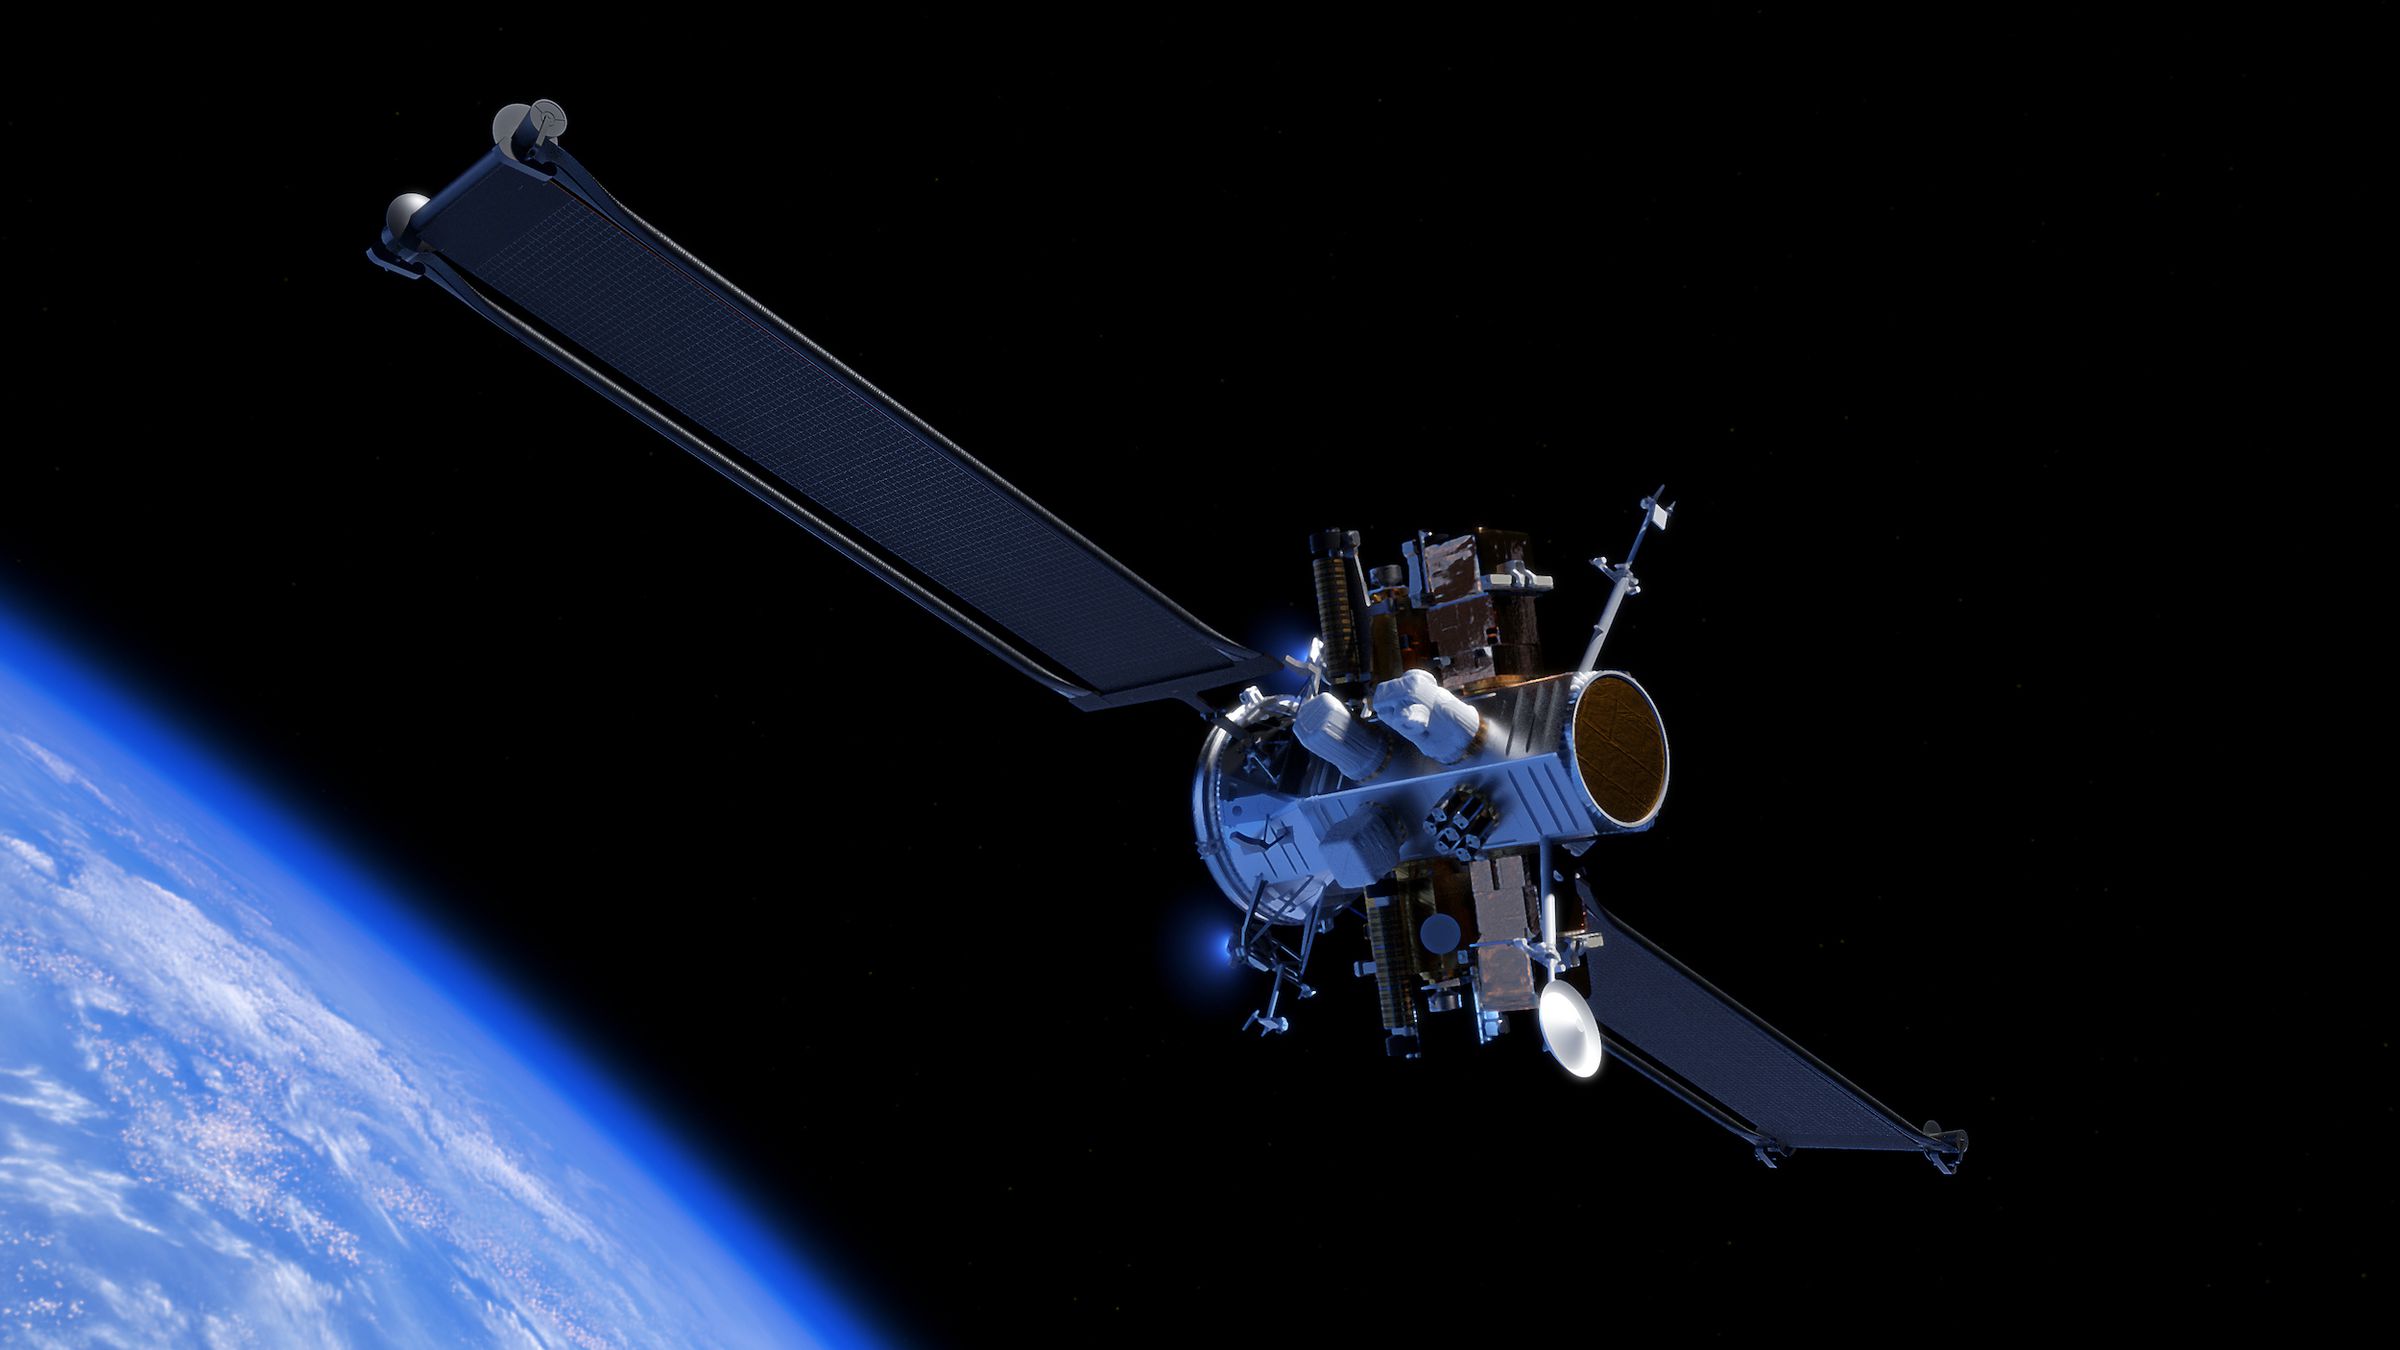 A rendering of a large satellite floating above the Earth